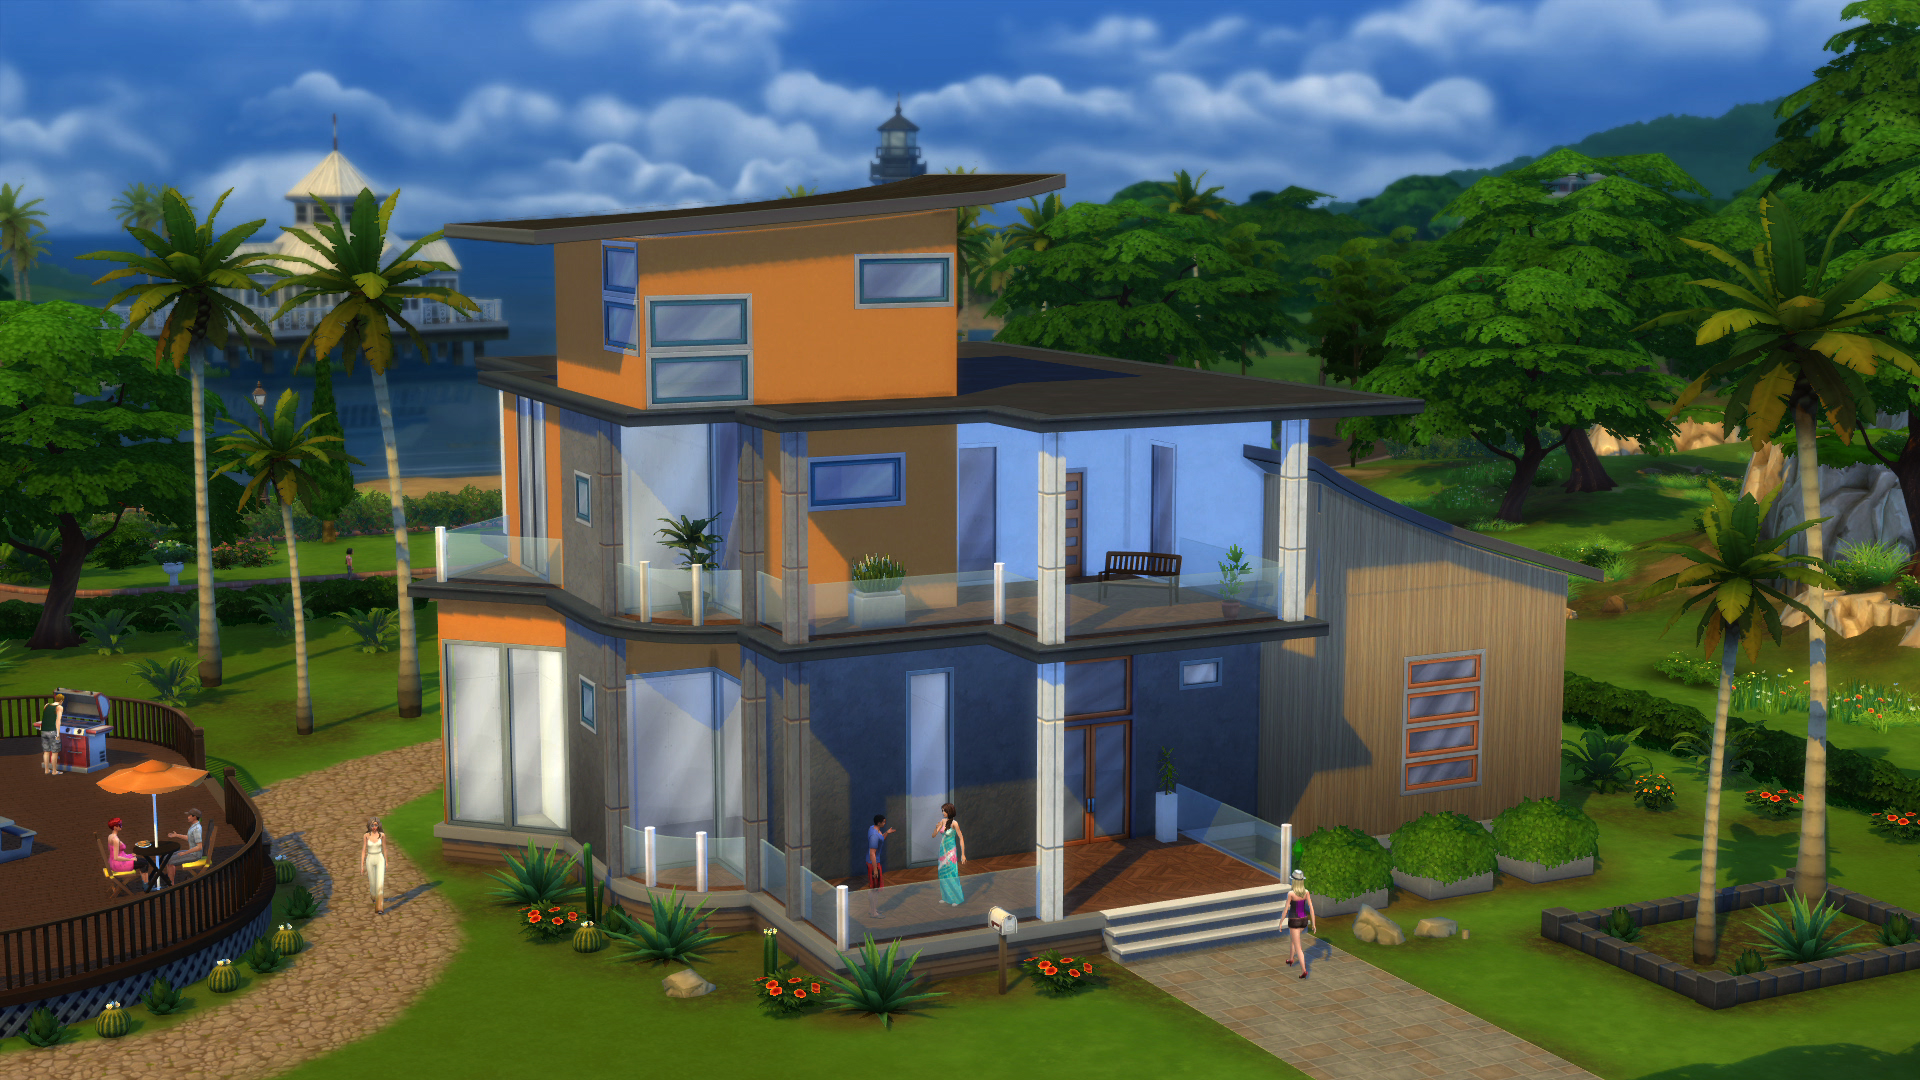 The Sims 4 Build Mode: Move Entire Buildings With Just A Click!